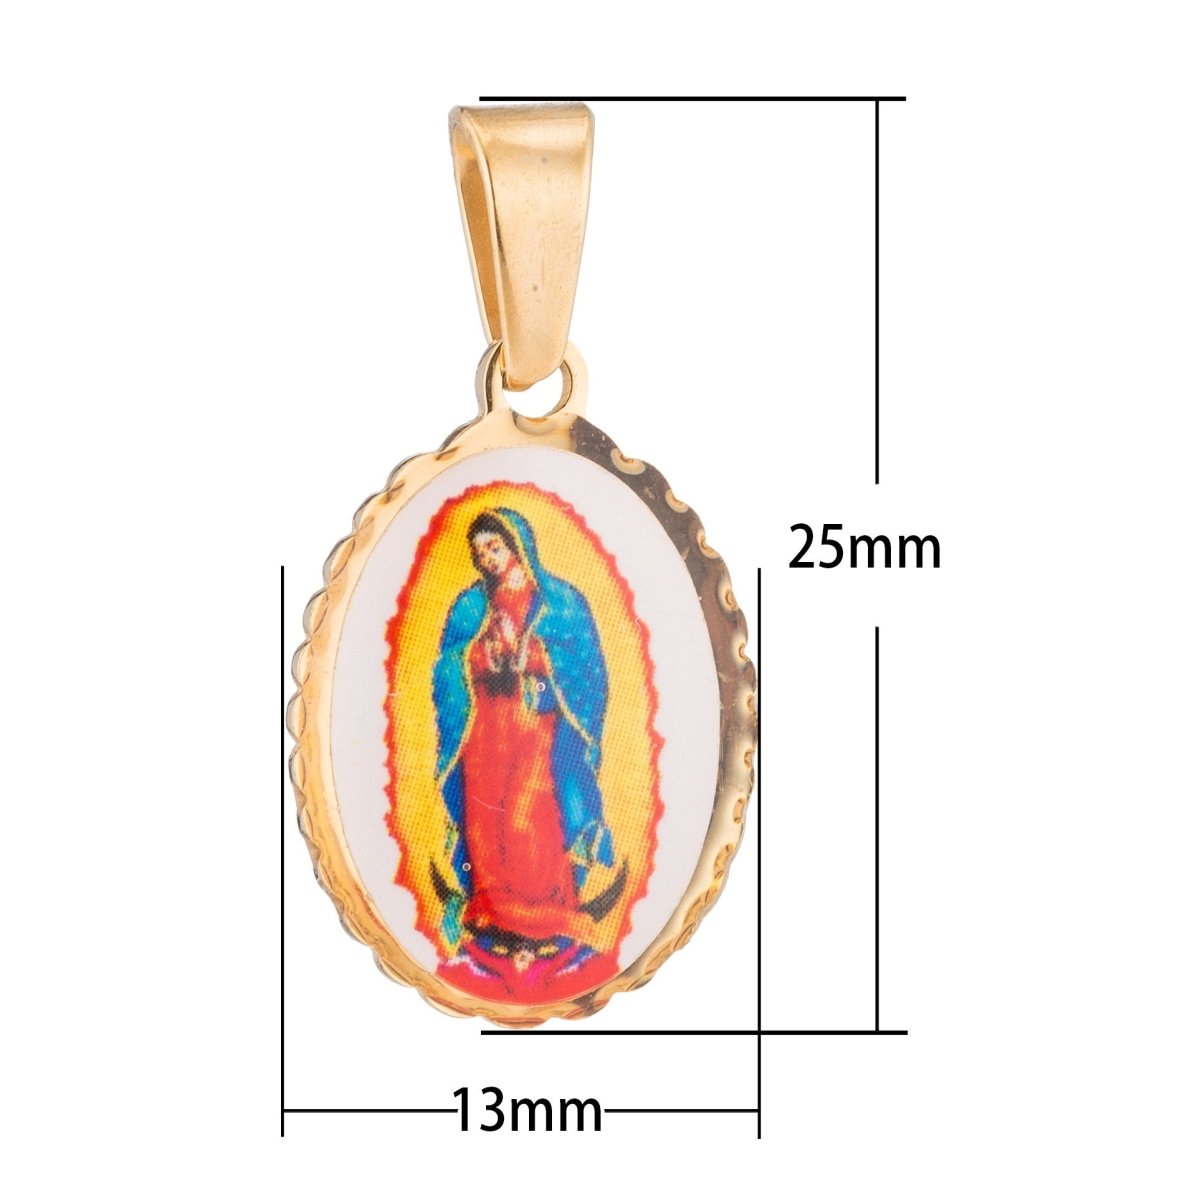 Stainless Steel Holy Mother Virgin Mary Pray for Us Praying Novena Bracelet Necklace Pendant Charm Bead Bails Finding for Jewelry Making J-487 - DLUXCA